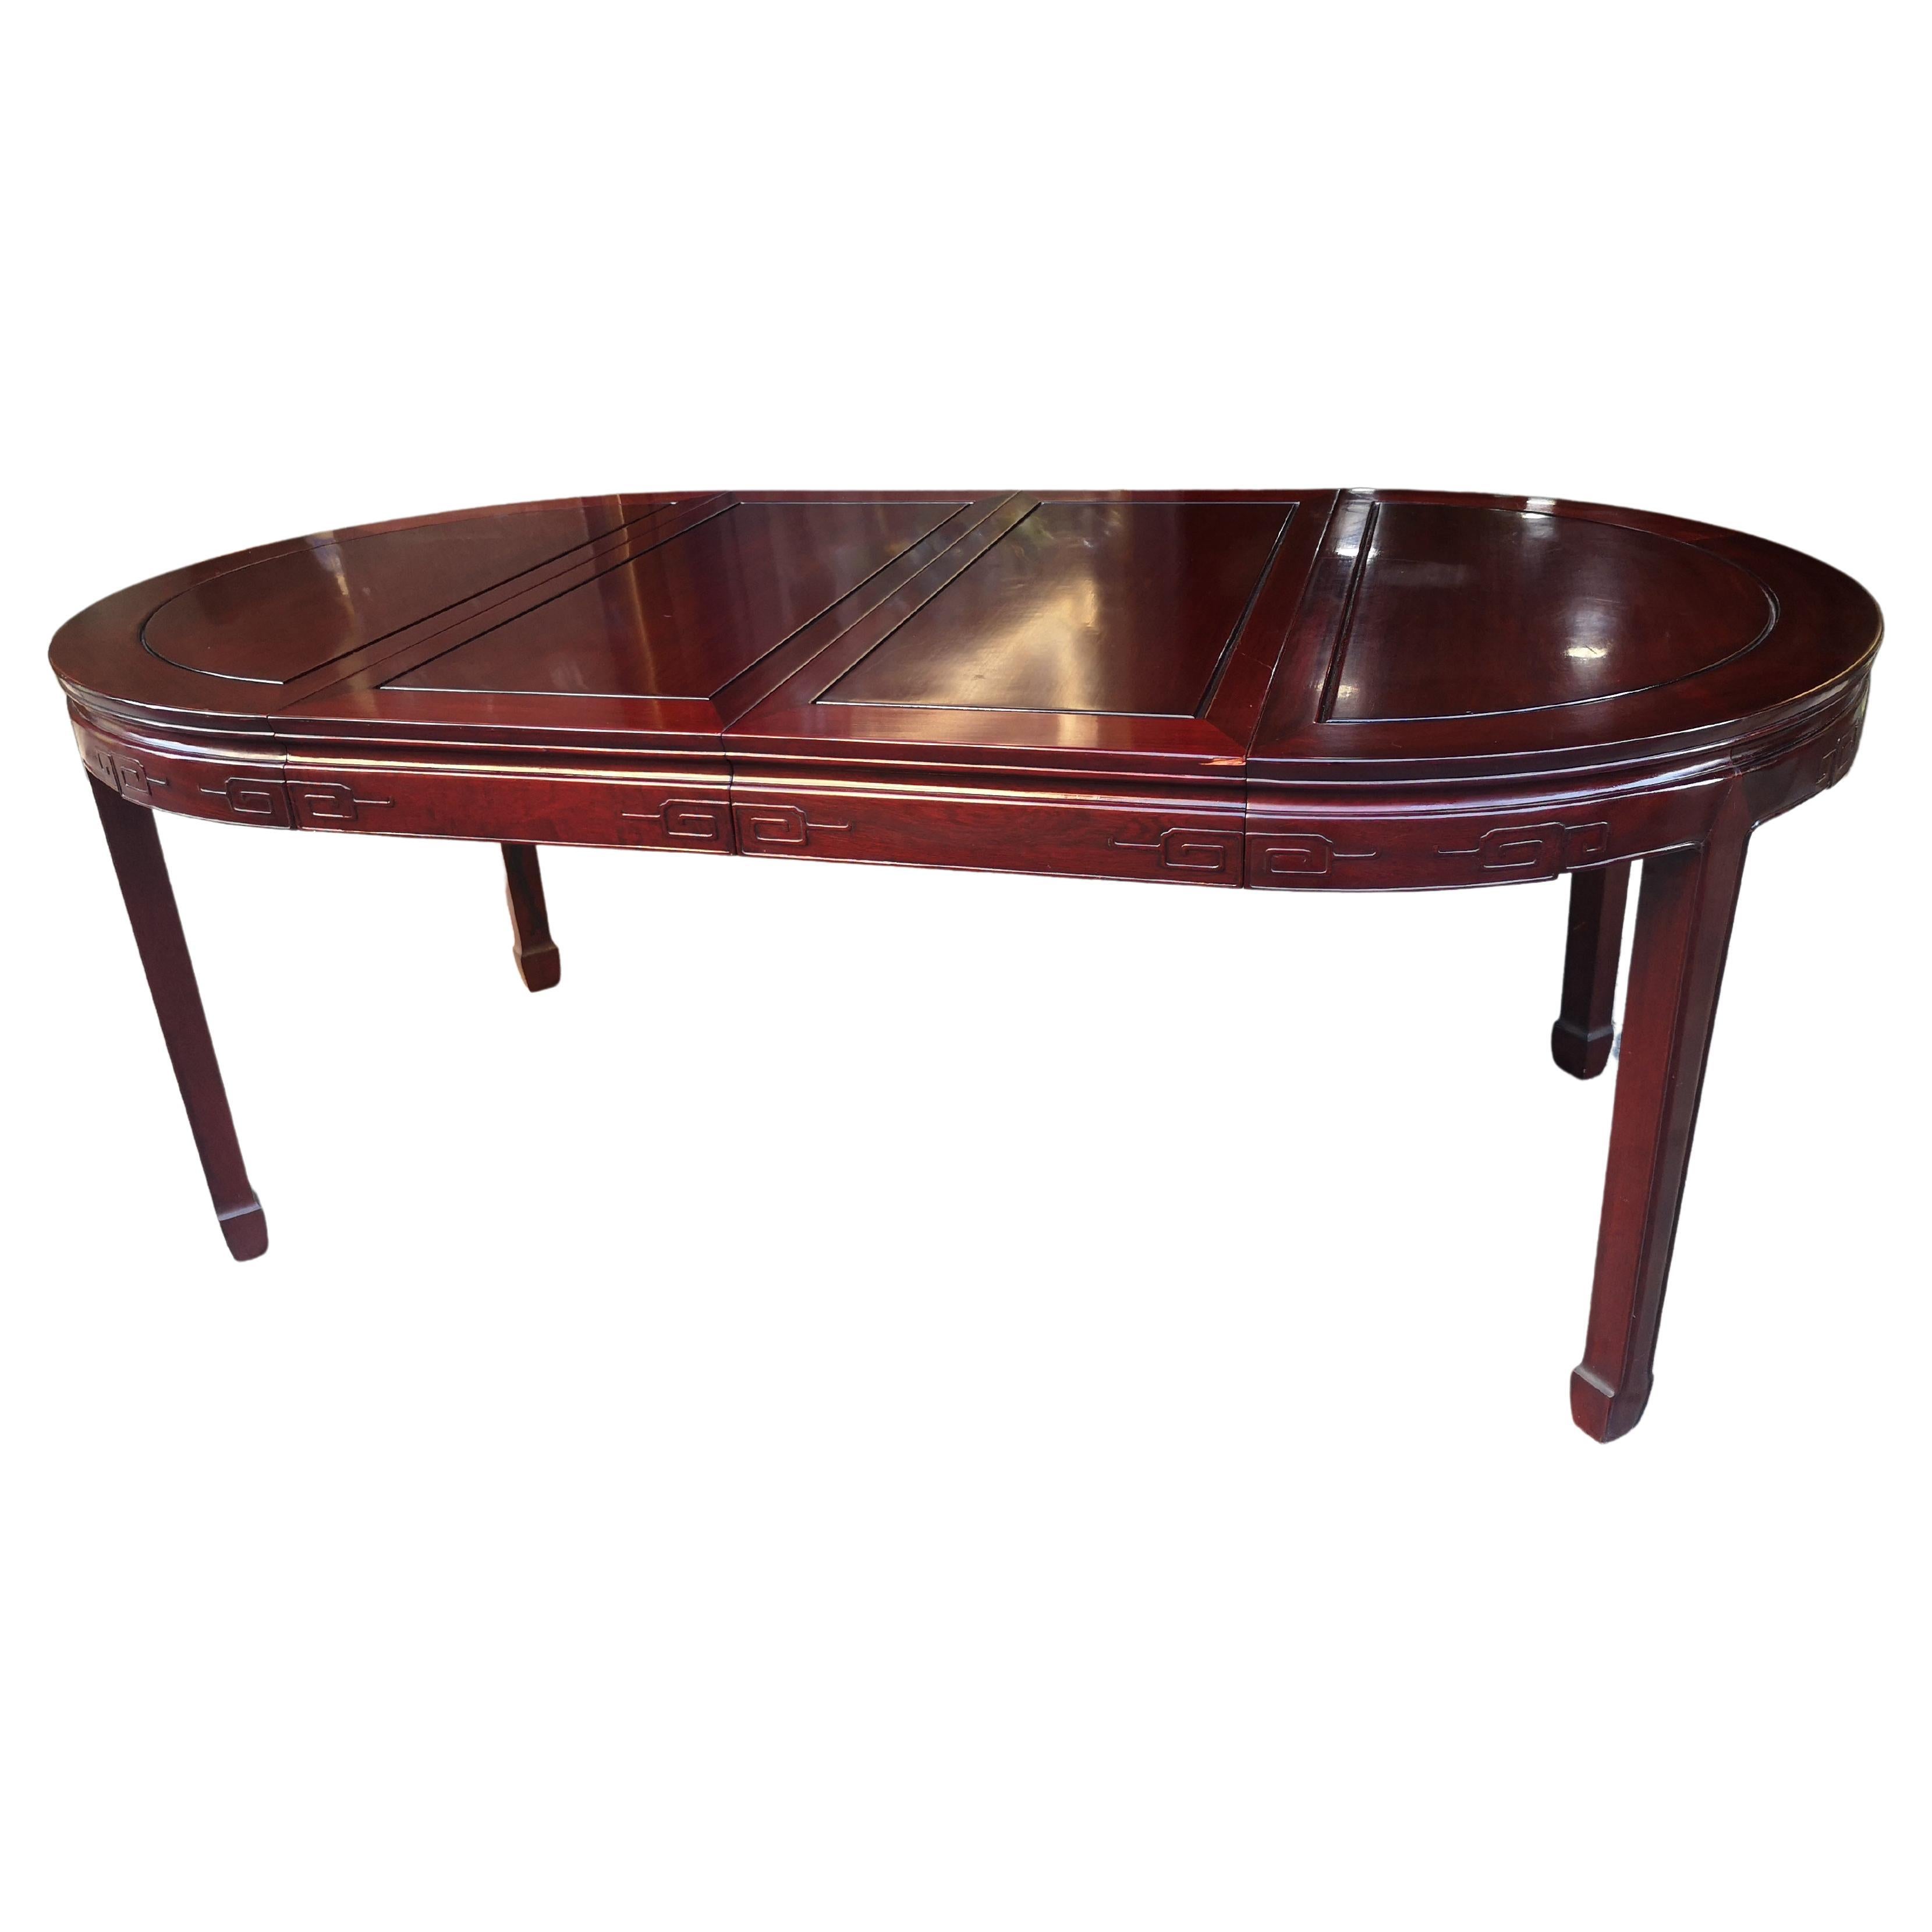 Chinese dining table 112 cm in mahogany from the 1970s with 2 extensions 204 cm For Sale